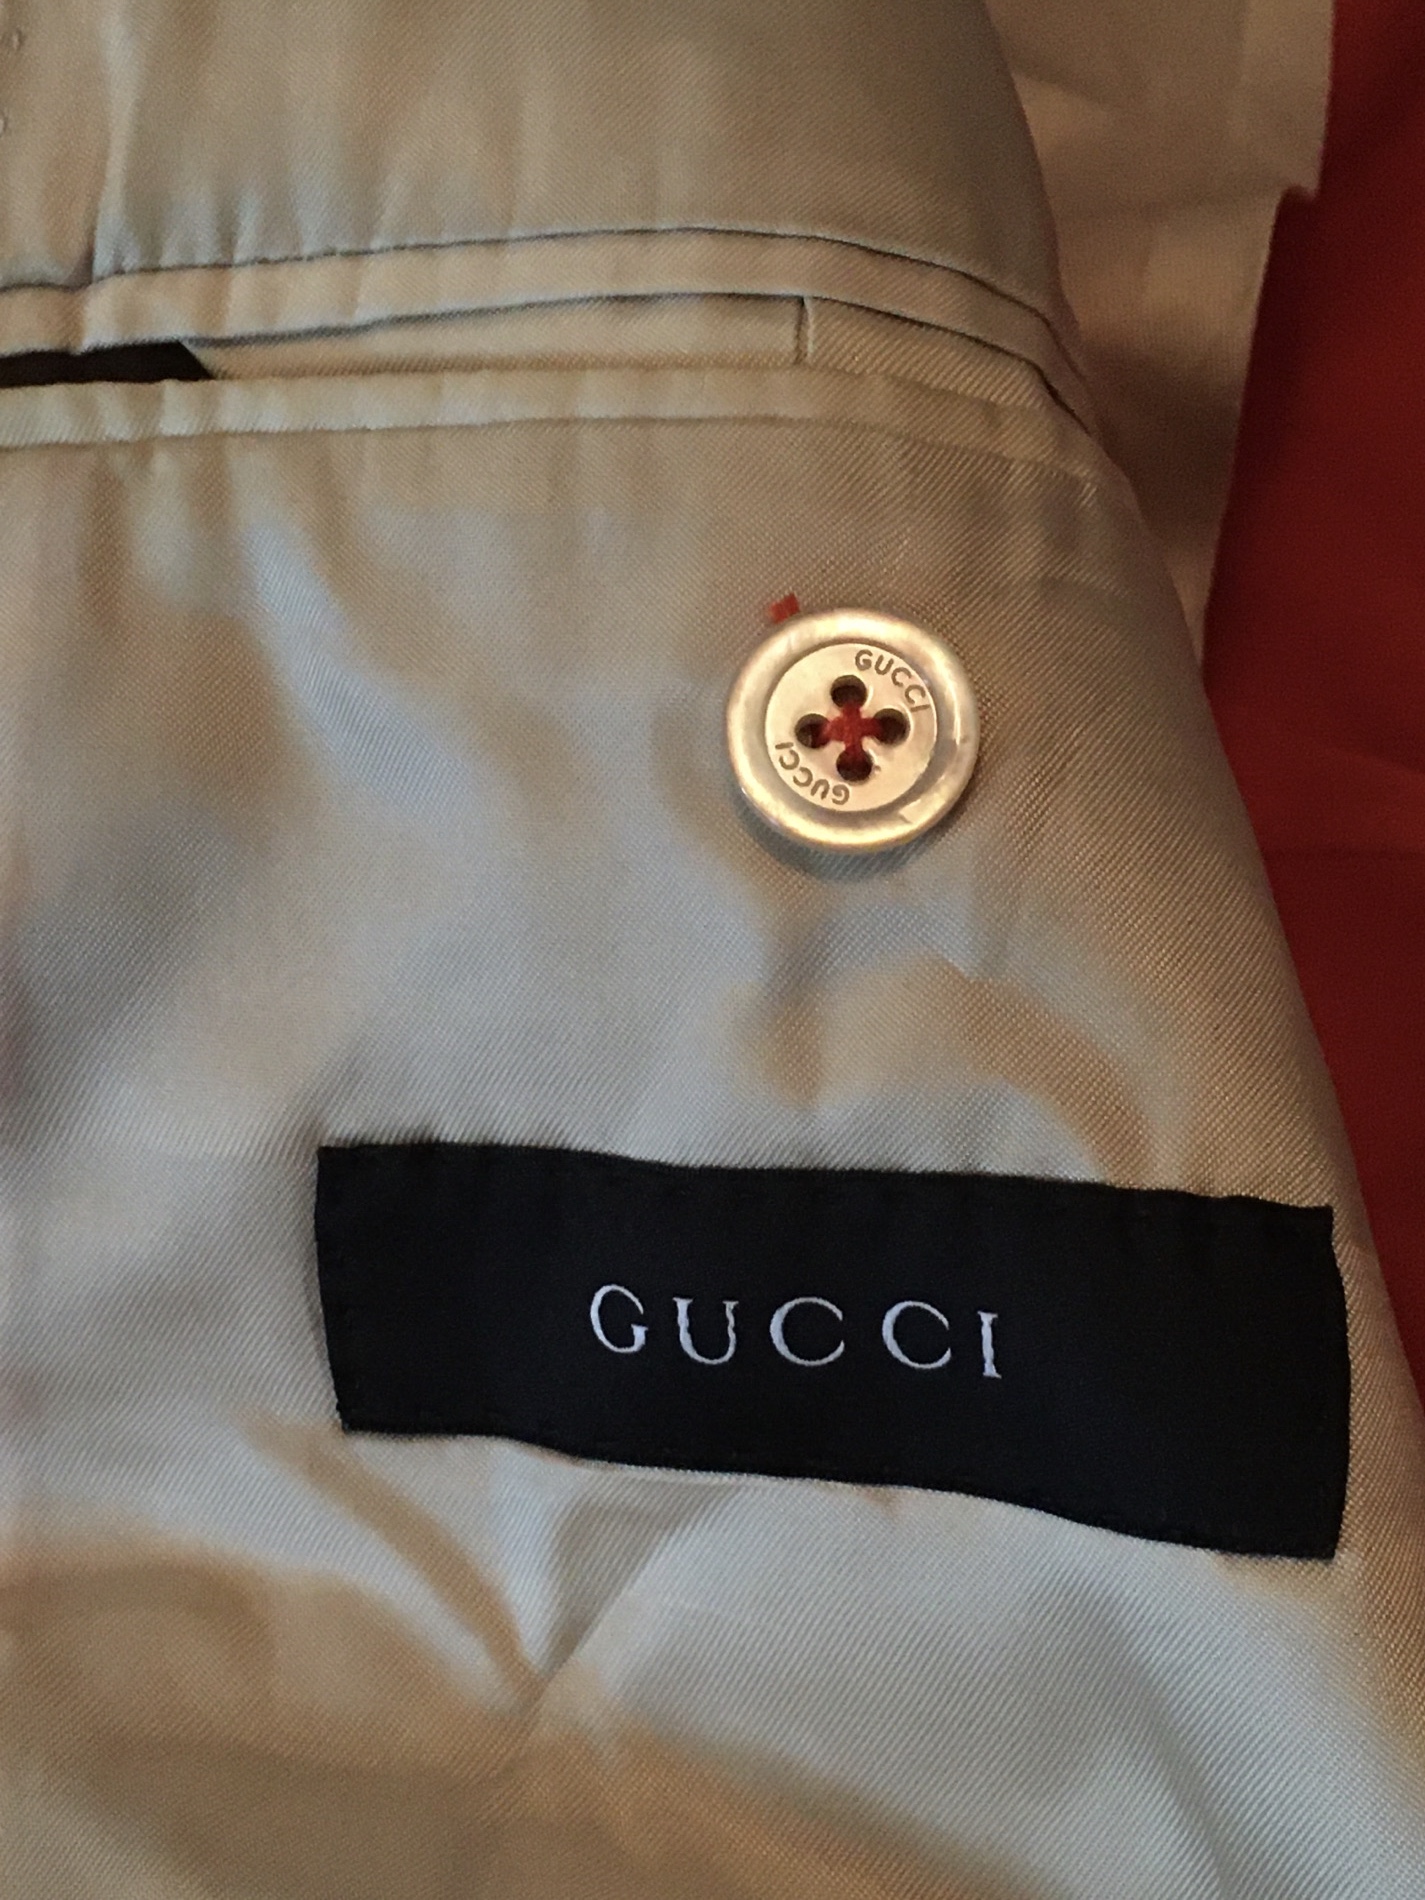 Info on Gucci clothing | Antiques Board